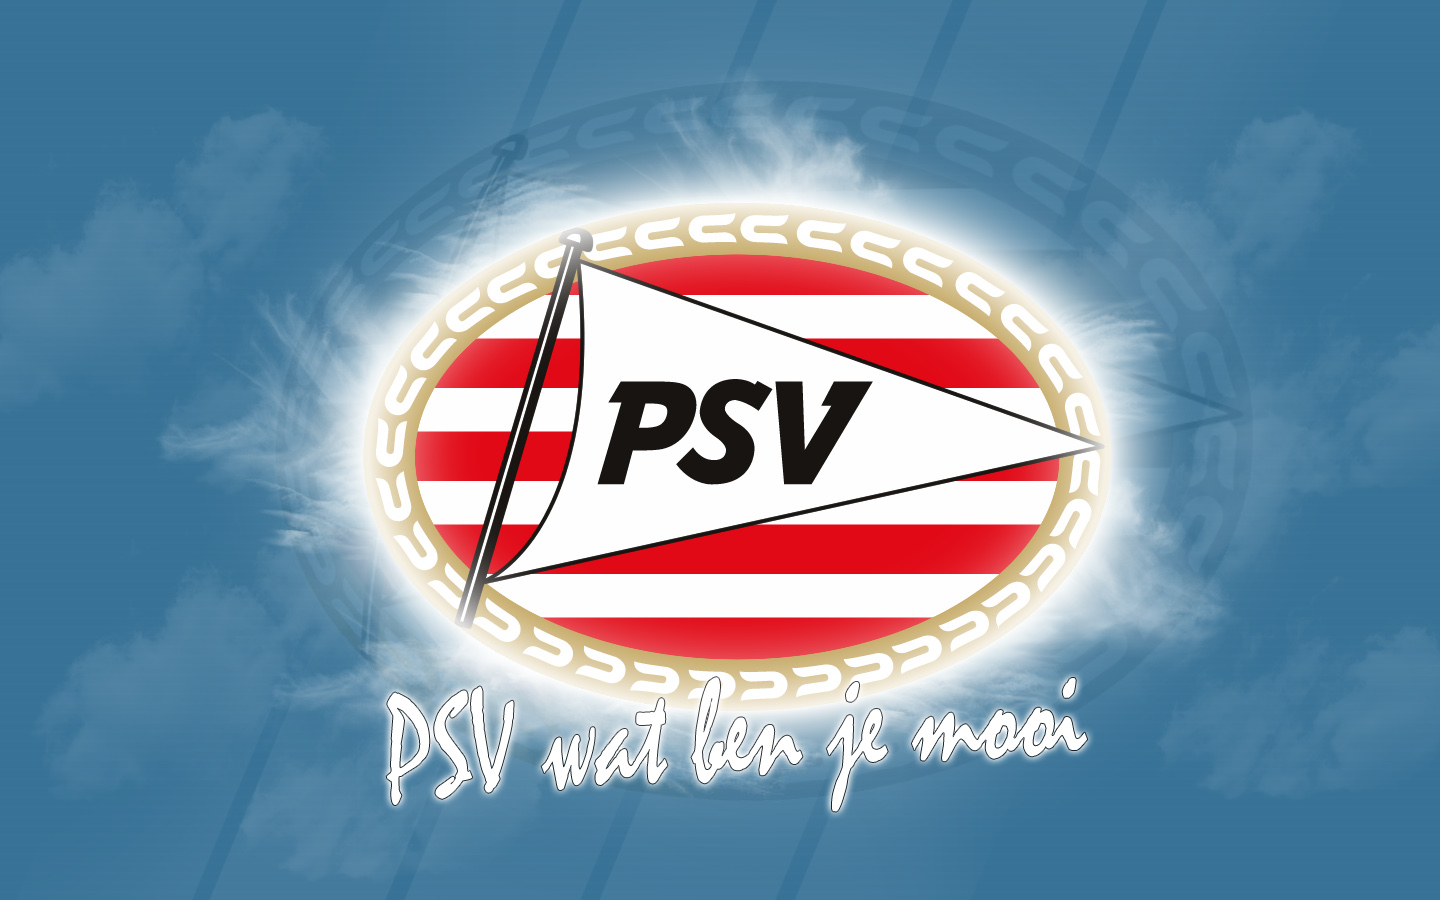 wallpaper free picture: PSV Eindhoven Wallpaper 2011
